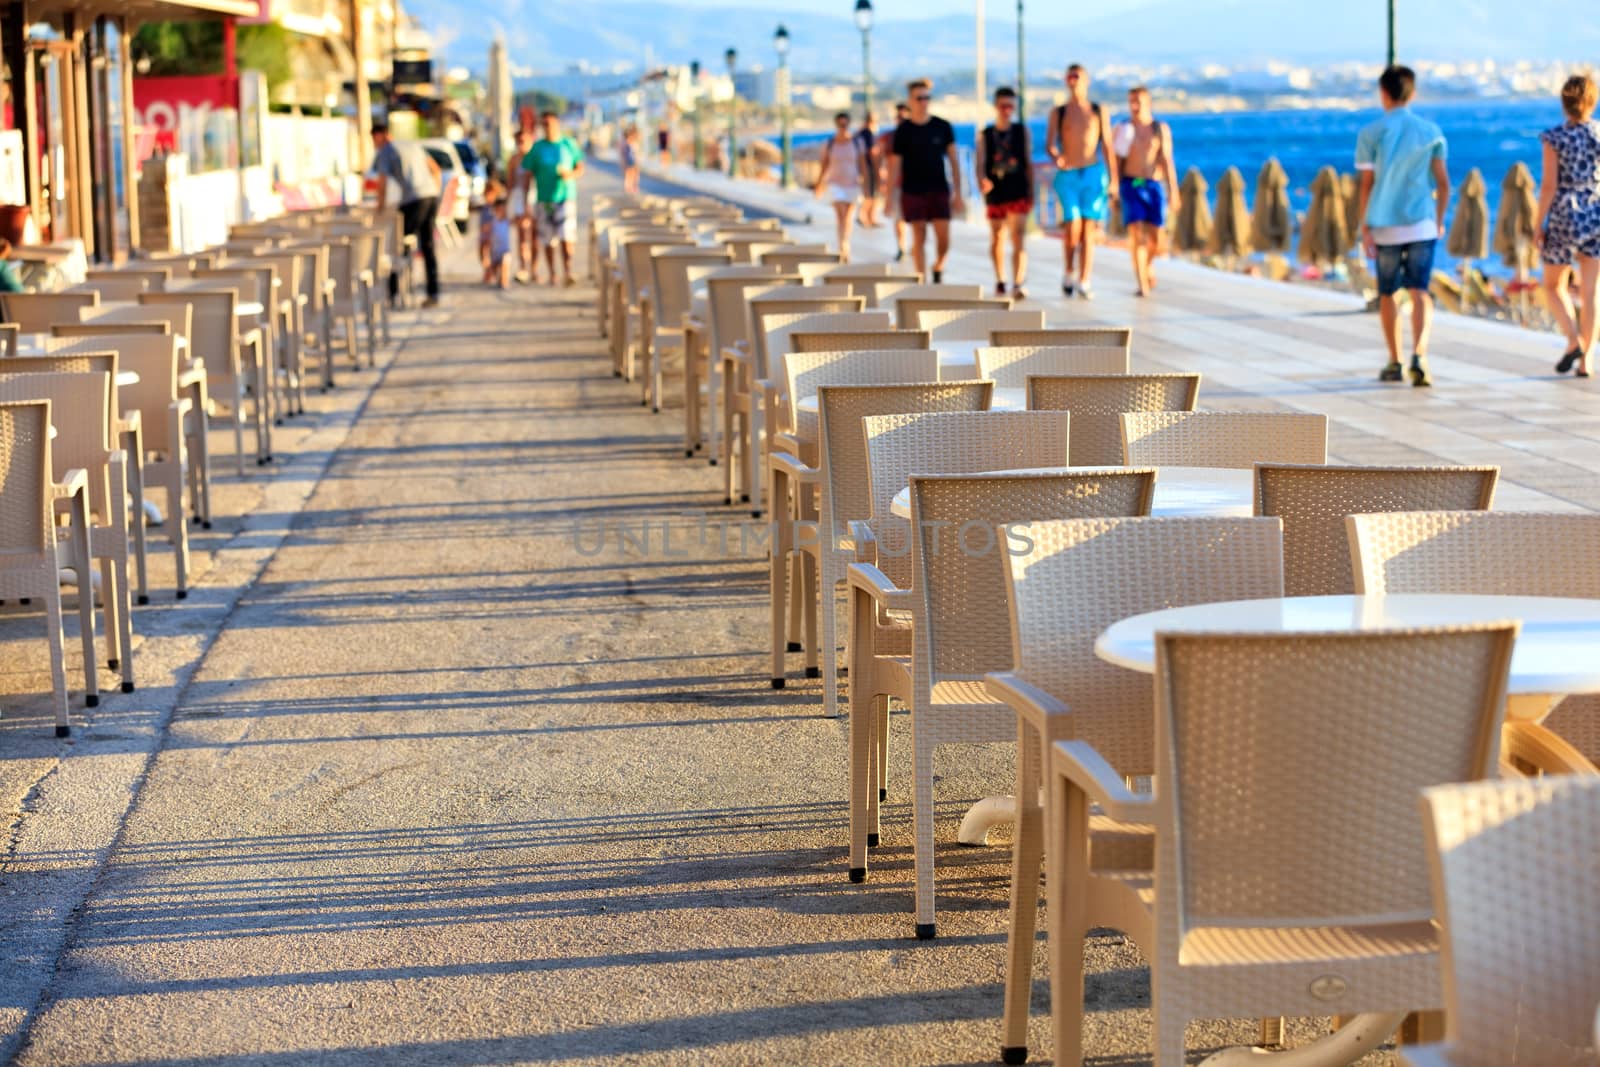 The tables and chairs of the beach cafe are located along the promenade among people walking near the blue sea in blur. by Sergii